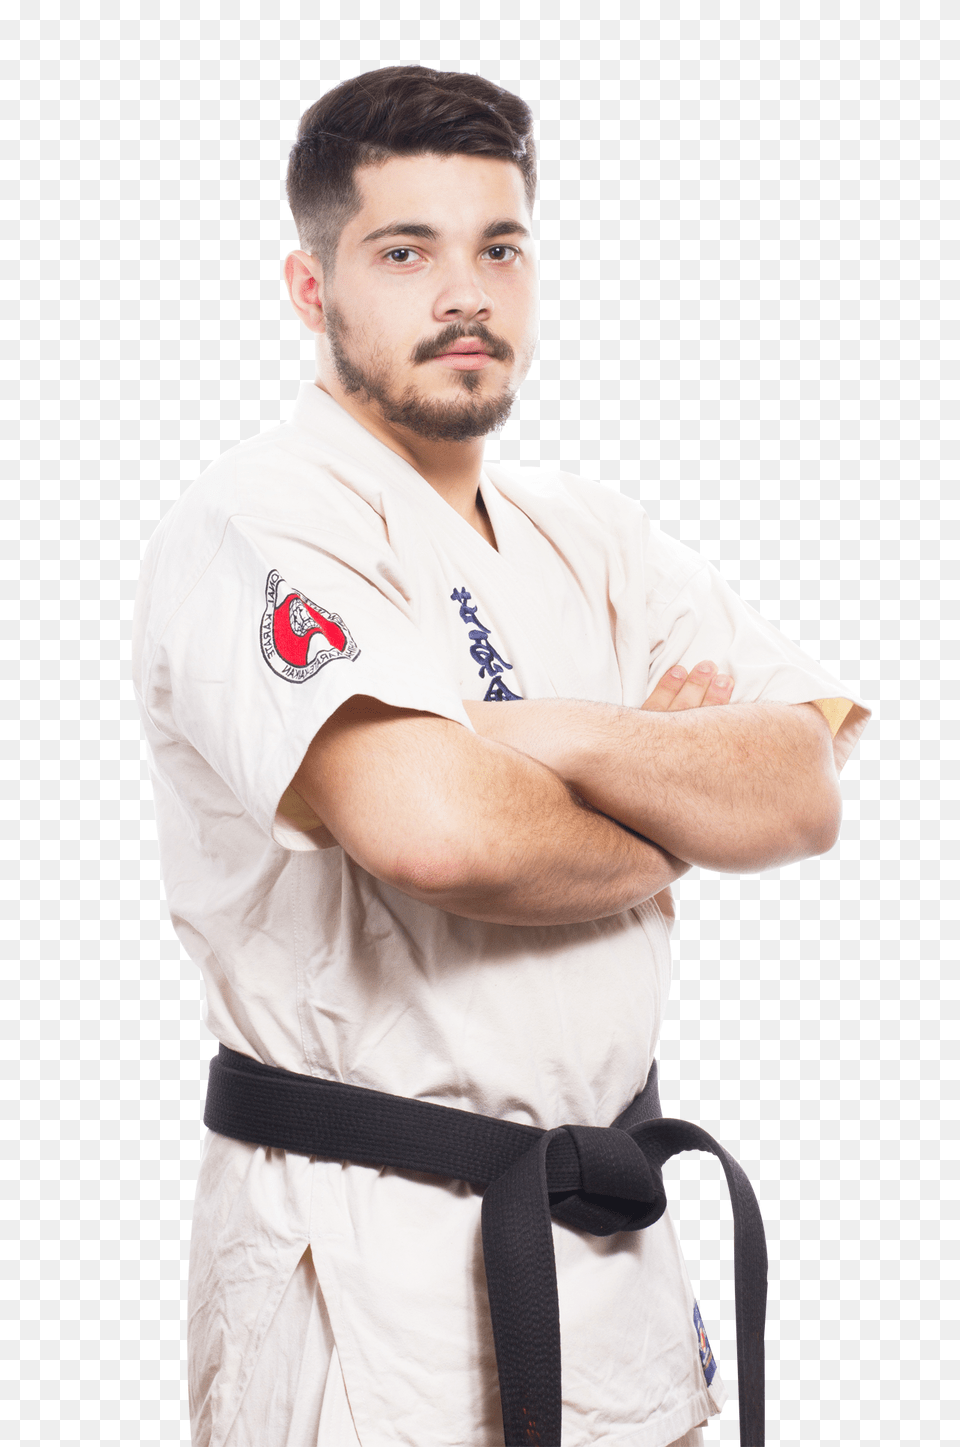 Pngpix Com Karate Male Fighter In White Kimono And Black Belt, Martial Arts, Person, Sport, Adult Png Image